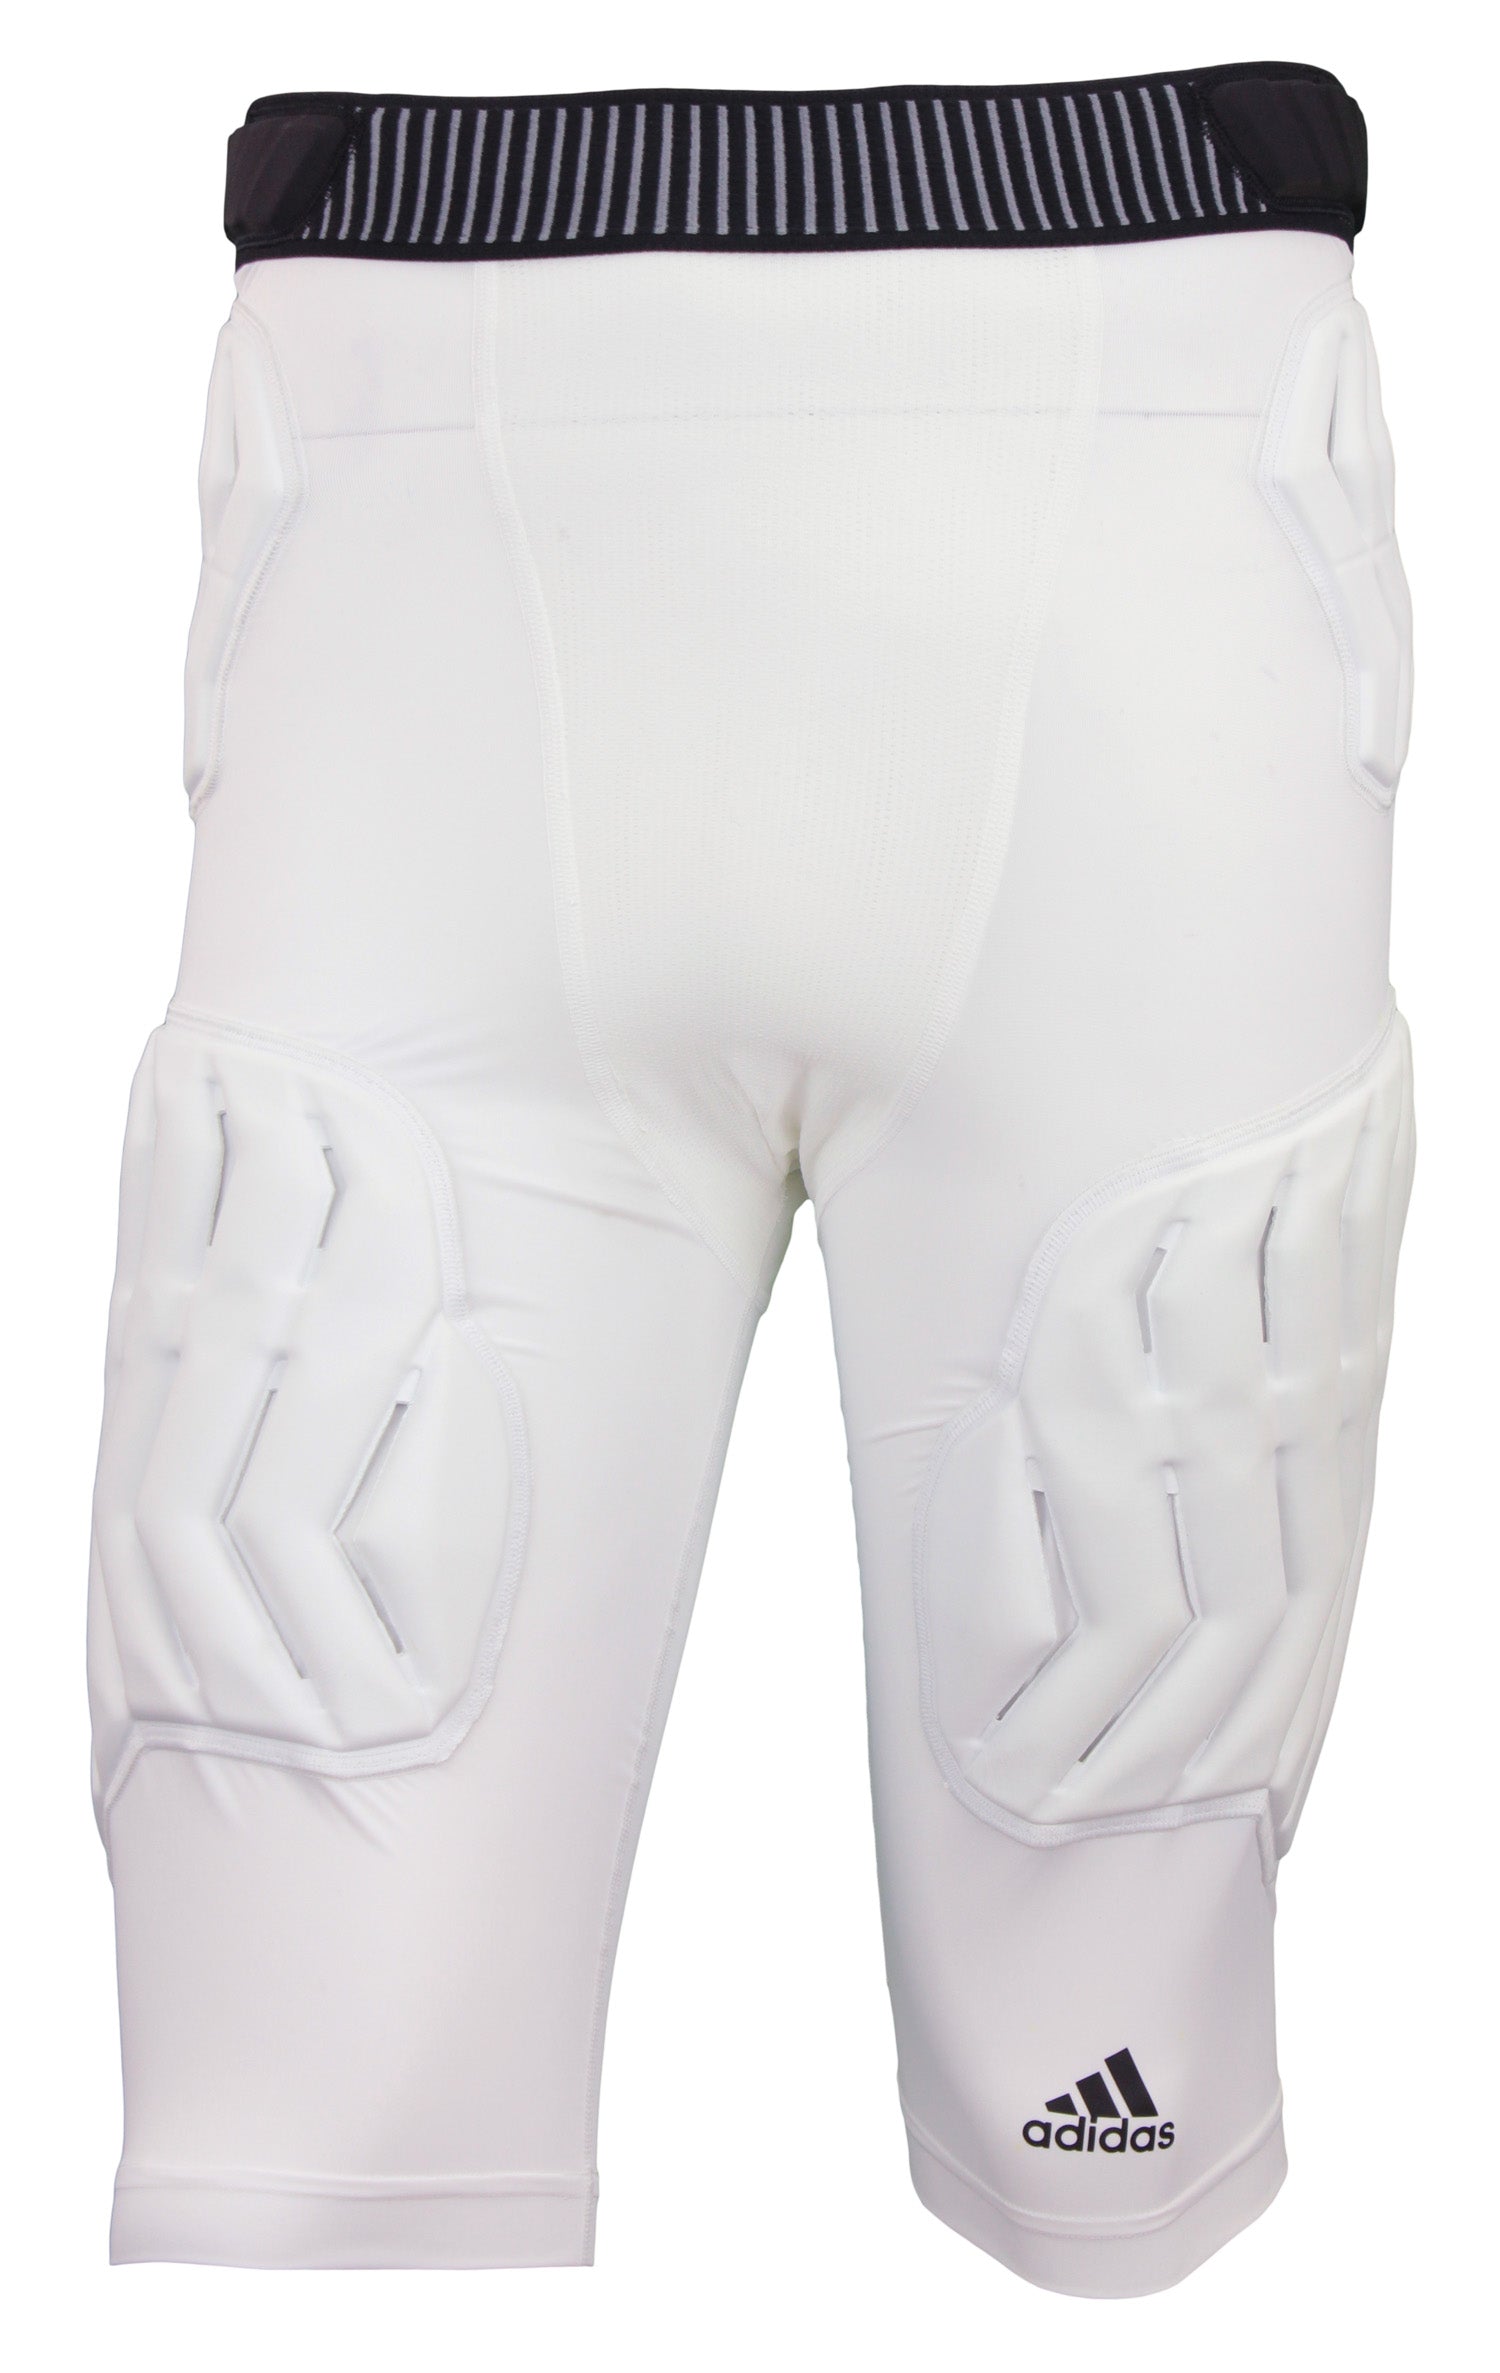 Buy adidas Techfit Men's 5-Pad Padded Compression Shorts - White